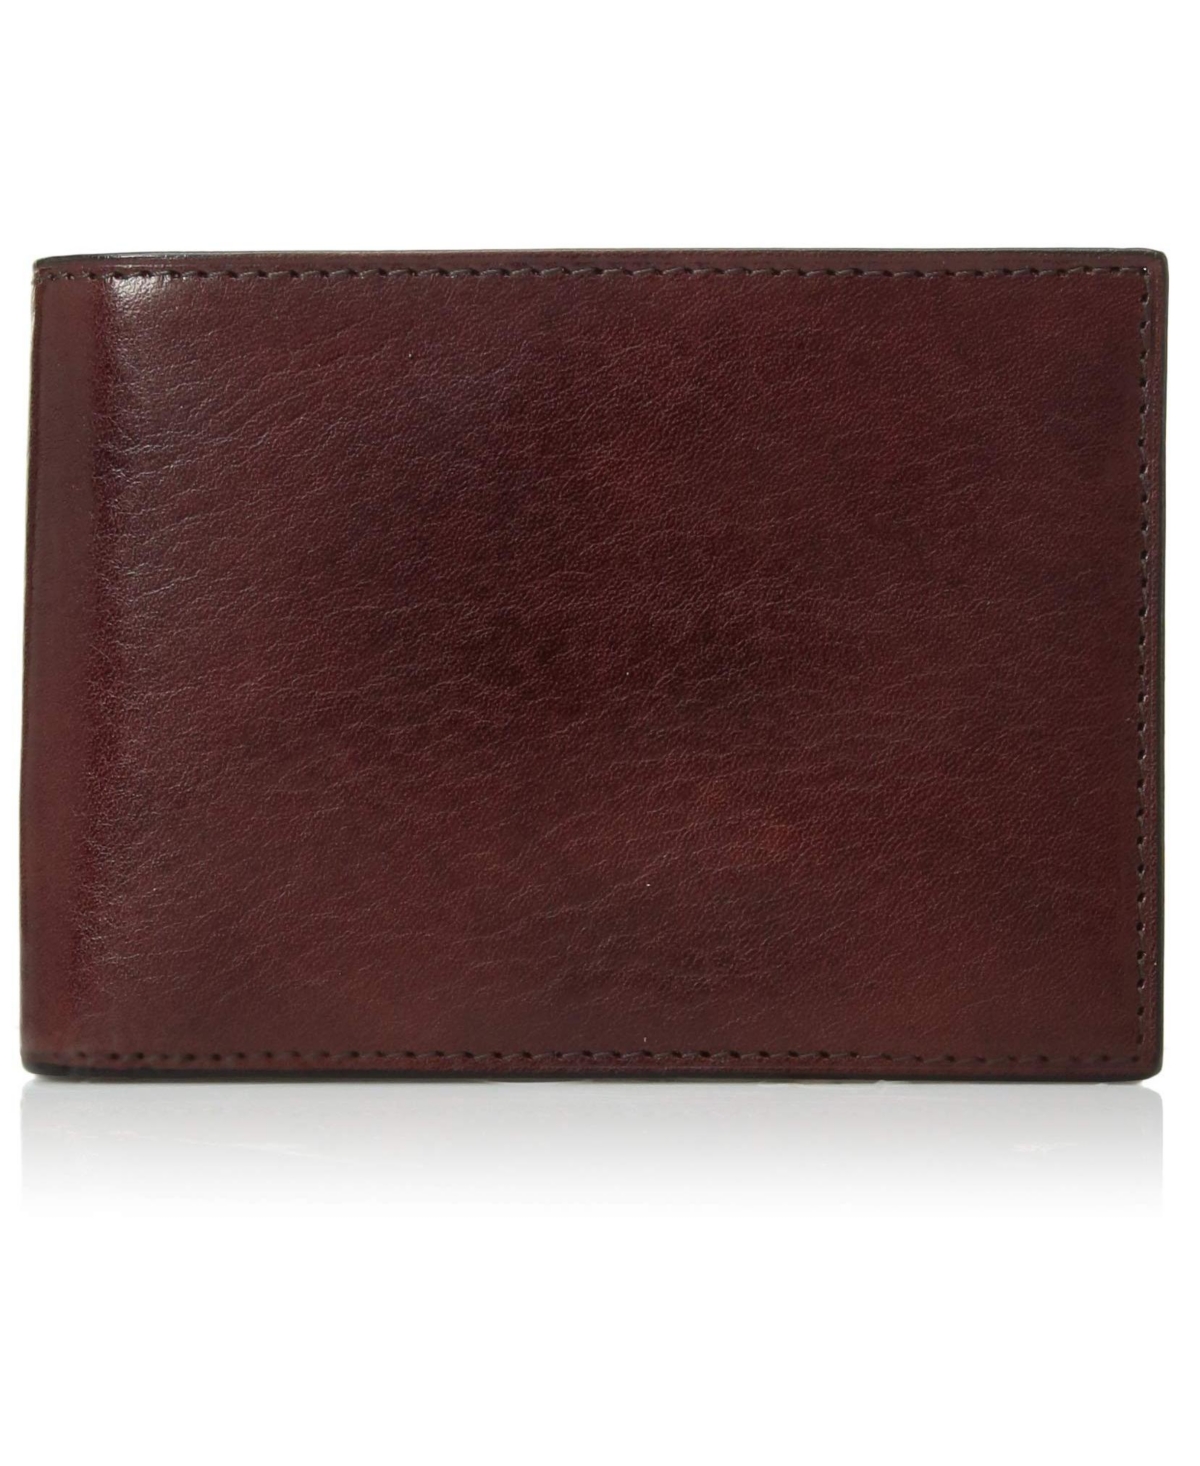 Mens Old Leather Credit Wallet w/Id Passcase - Dark brown